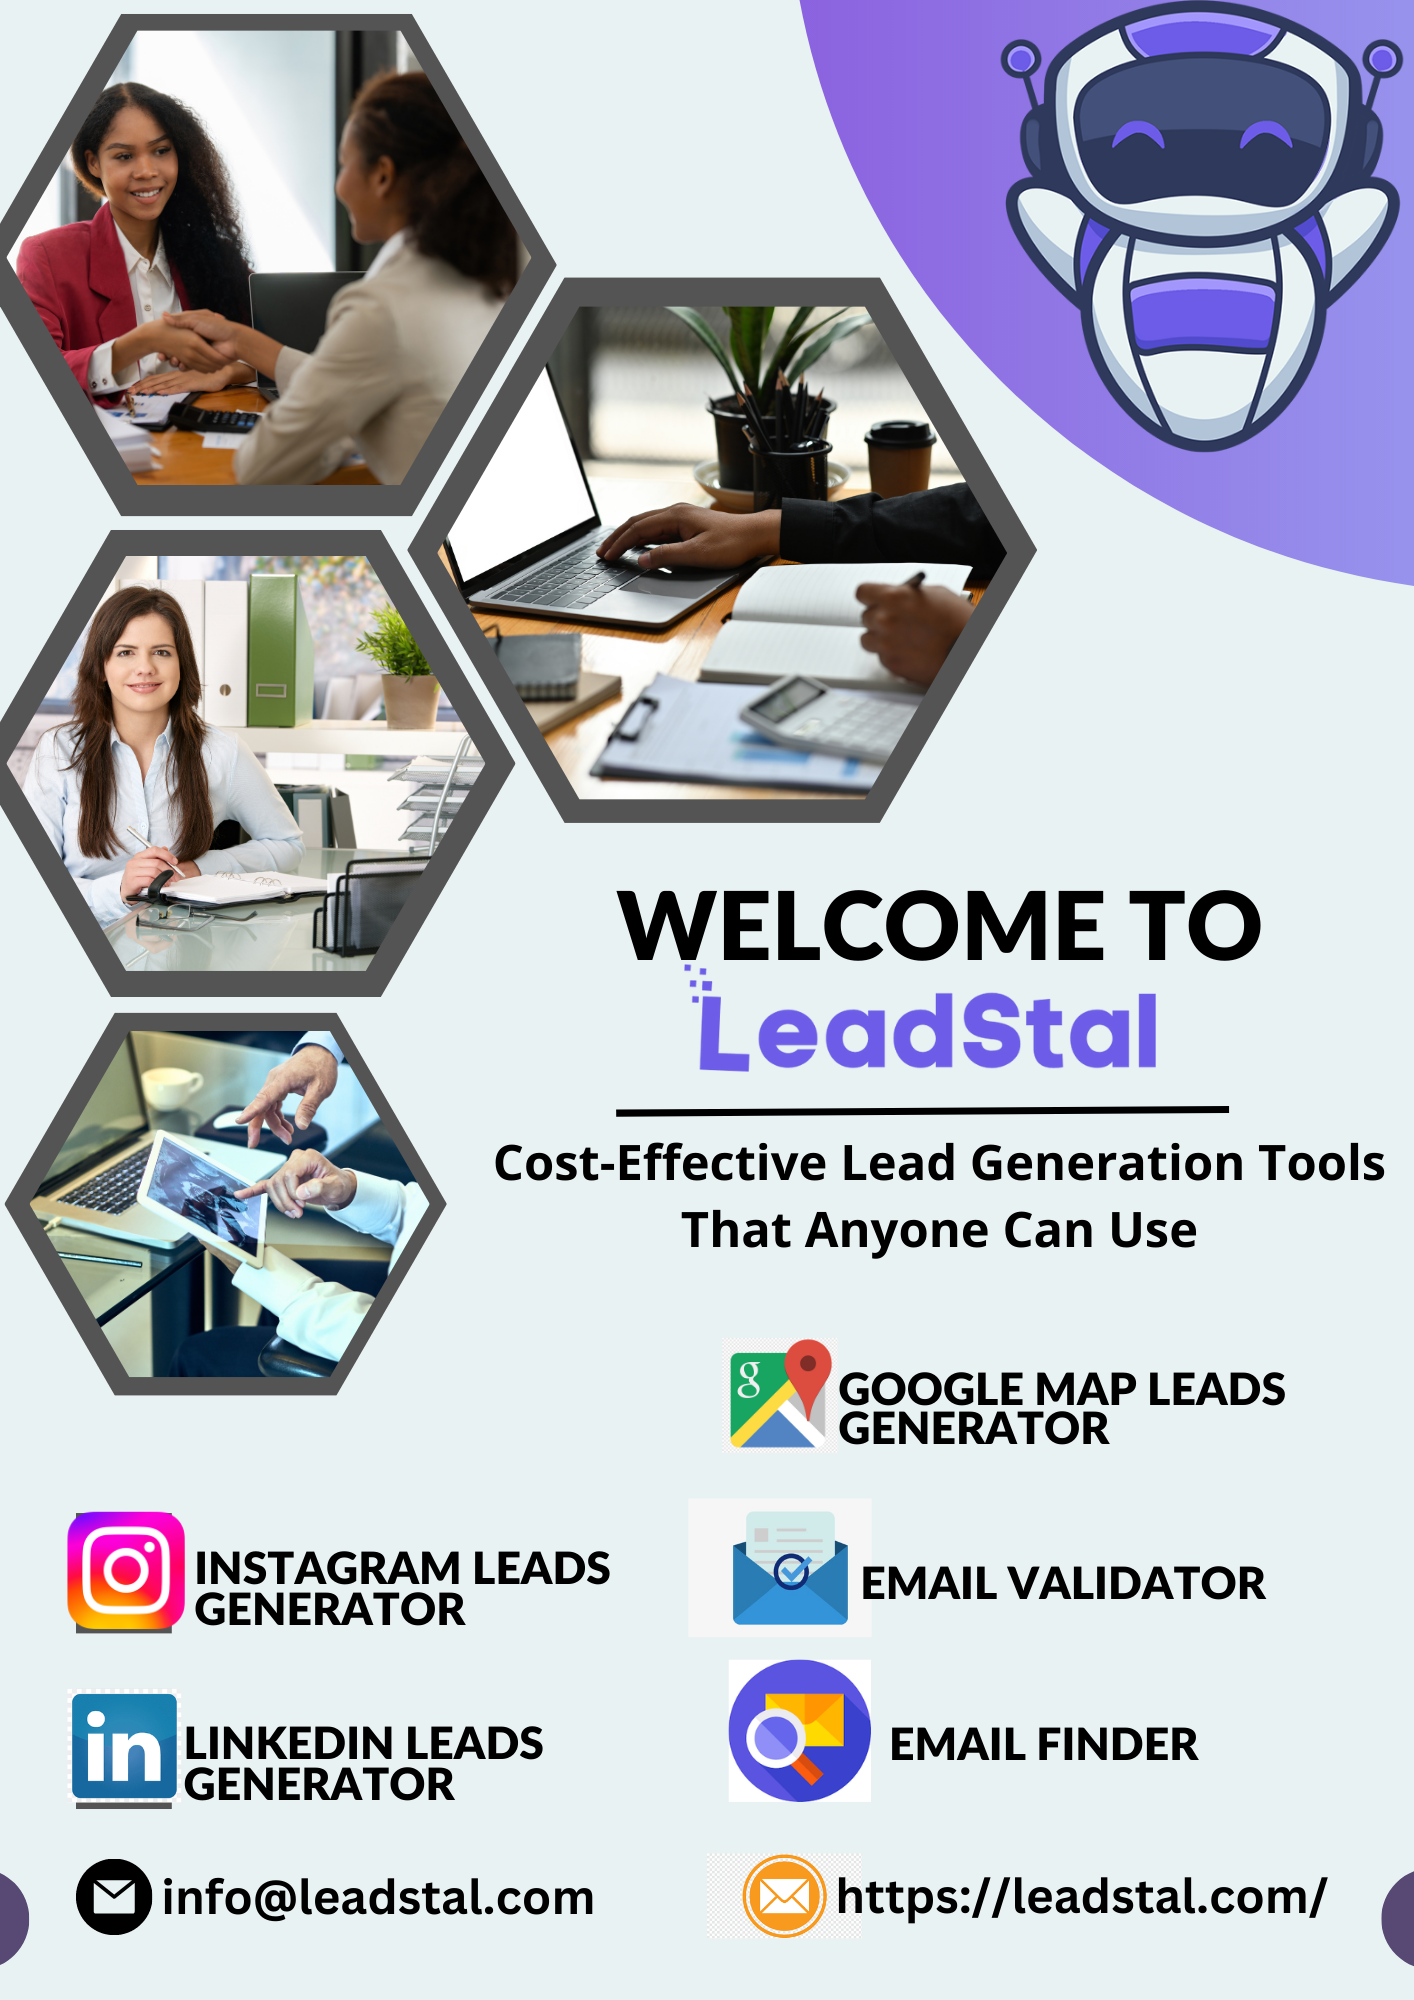 Lead generation tools by LeadStal.